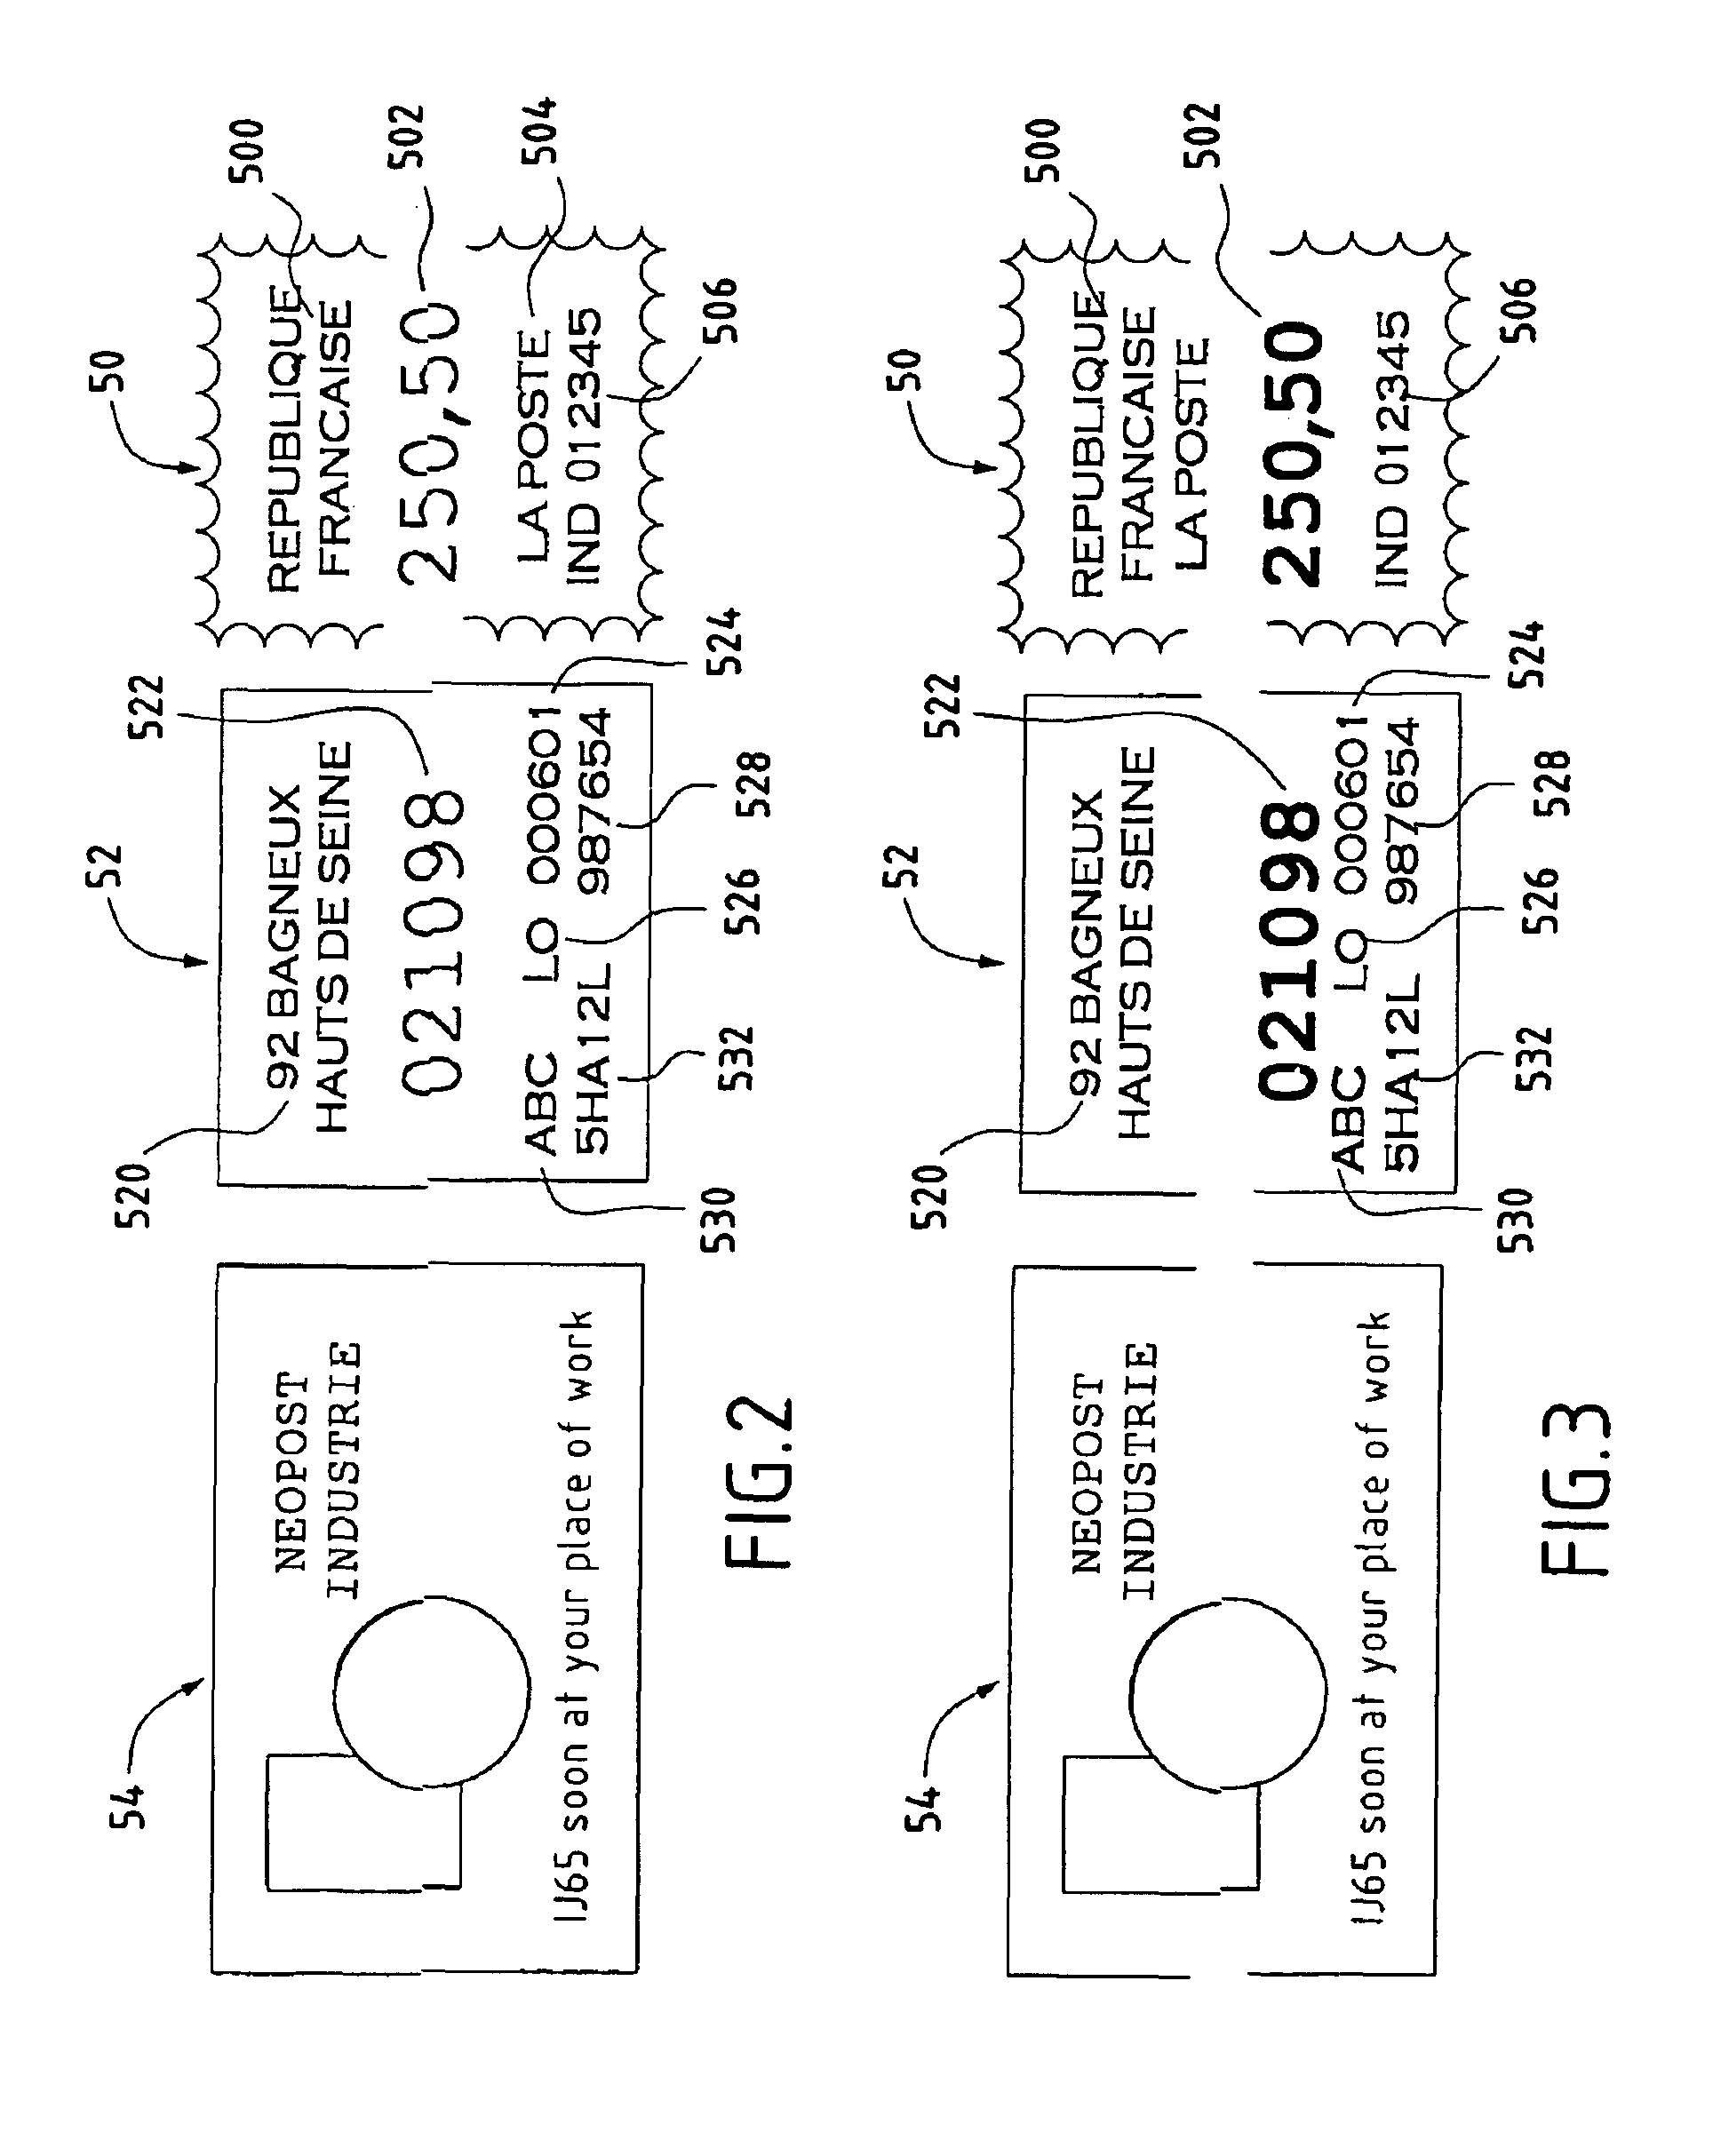 Postal printing device with facilitated reading